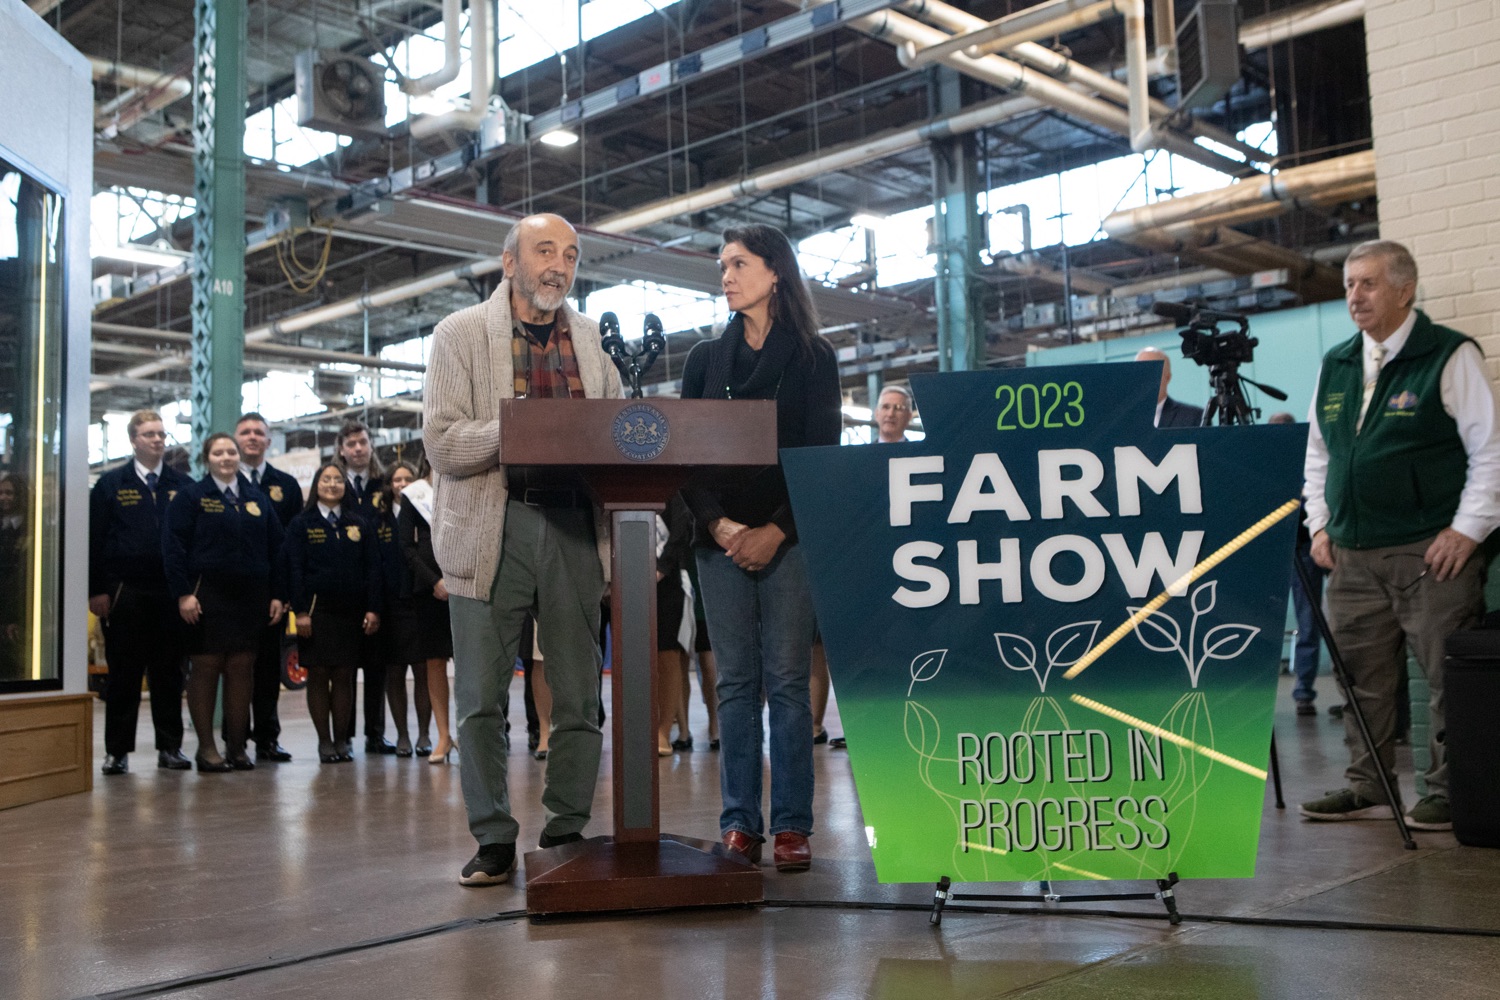 Jim Victor and Marie Pelton, Sculptors, joined Secretary of Agriculture Russell Redding to unveil the 2023 Pennsylvania Farm Show butter sculpture. Carved from 1,000 pounds of butter, it highlights this years theme: Rooted in Progress.<br><a href="https://filesource.amperwave.net/commonwealthofpa/photo/22383_Ag_ButterSculpture_ED_20.jpg" target="_blank">⇣ Download Photo</a>